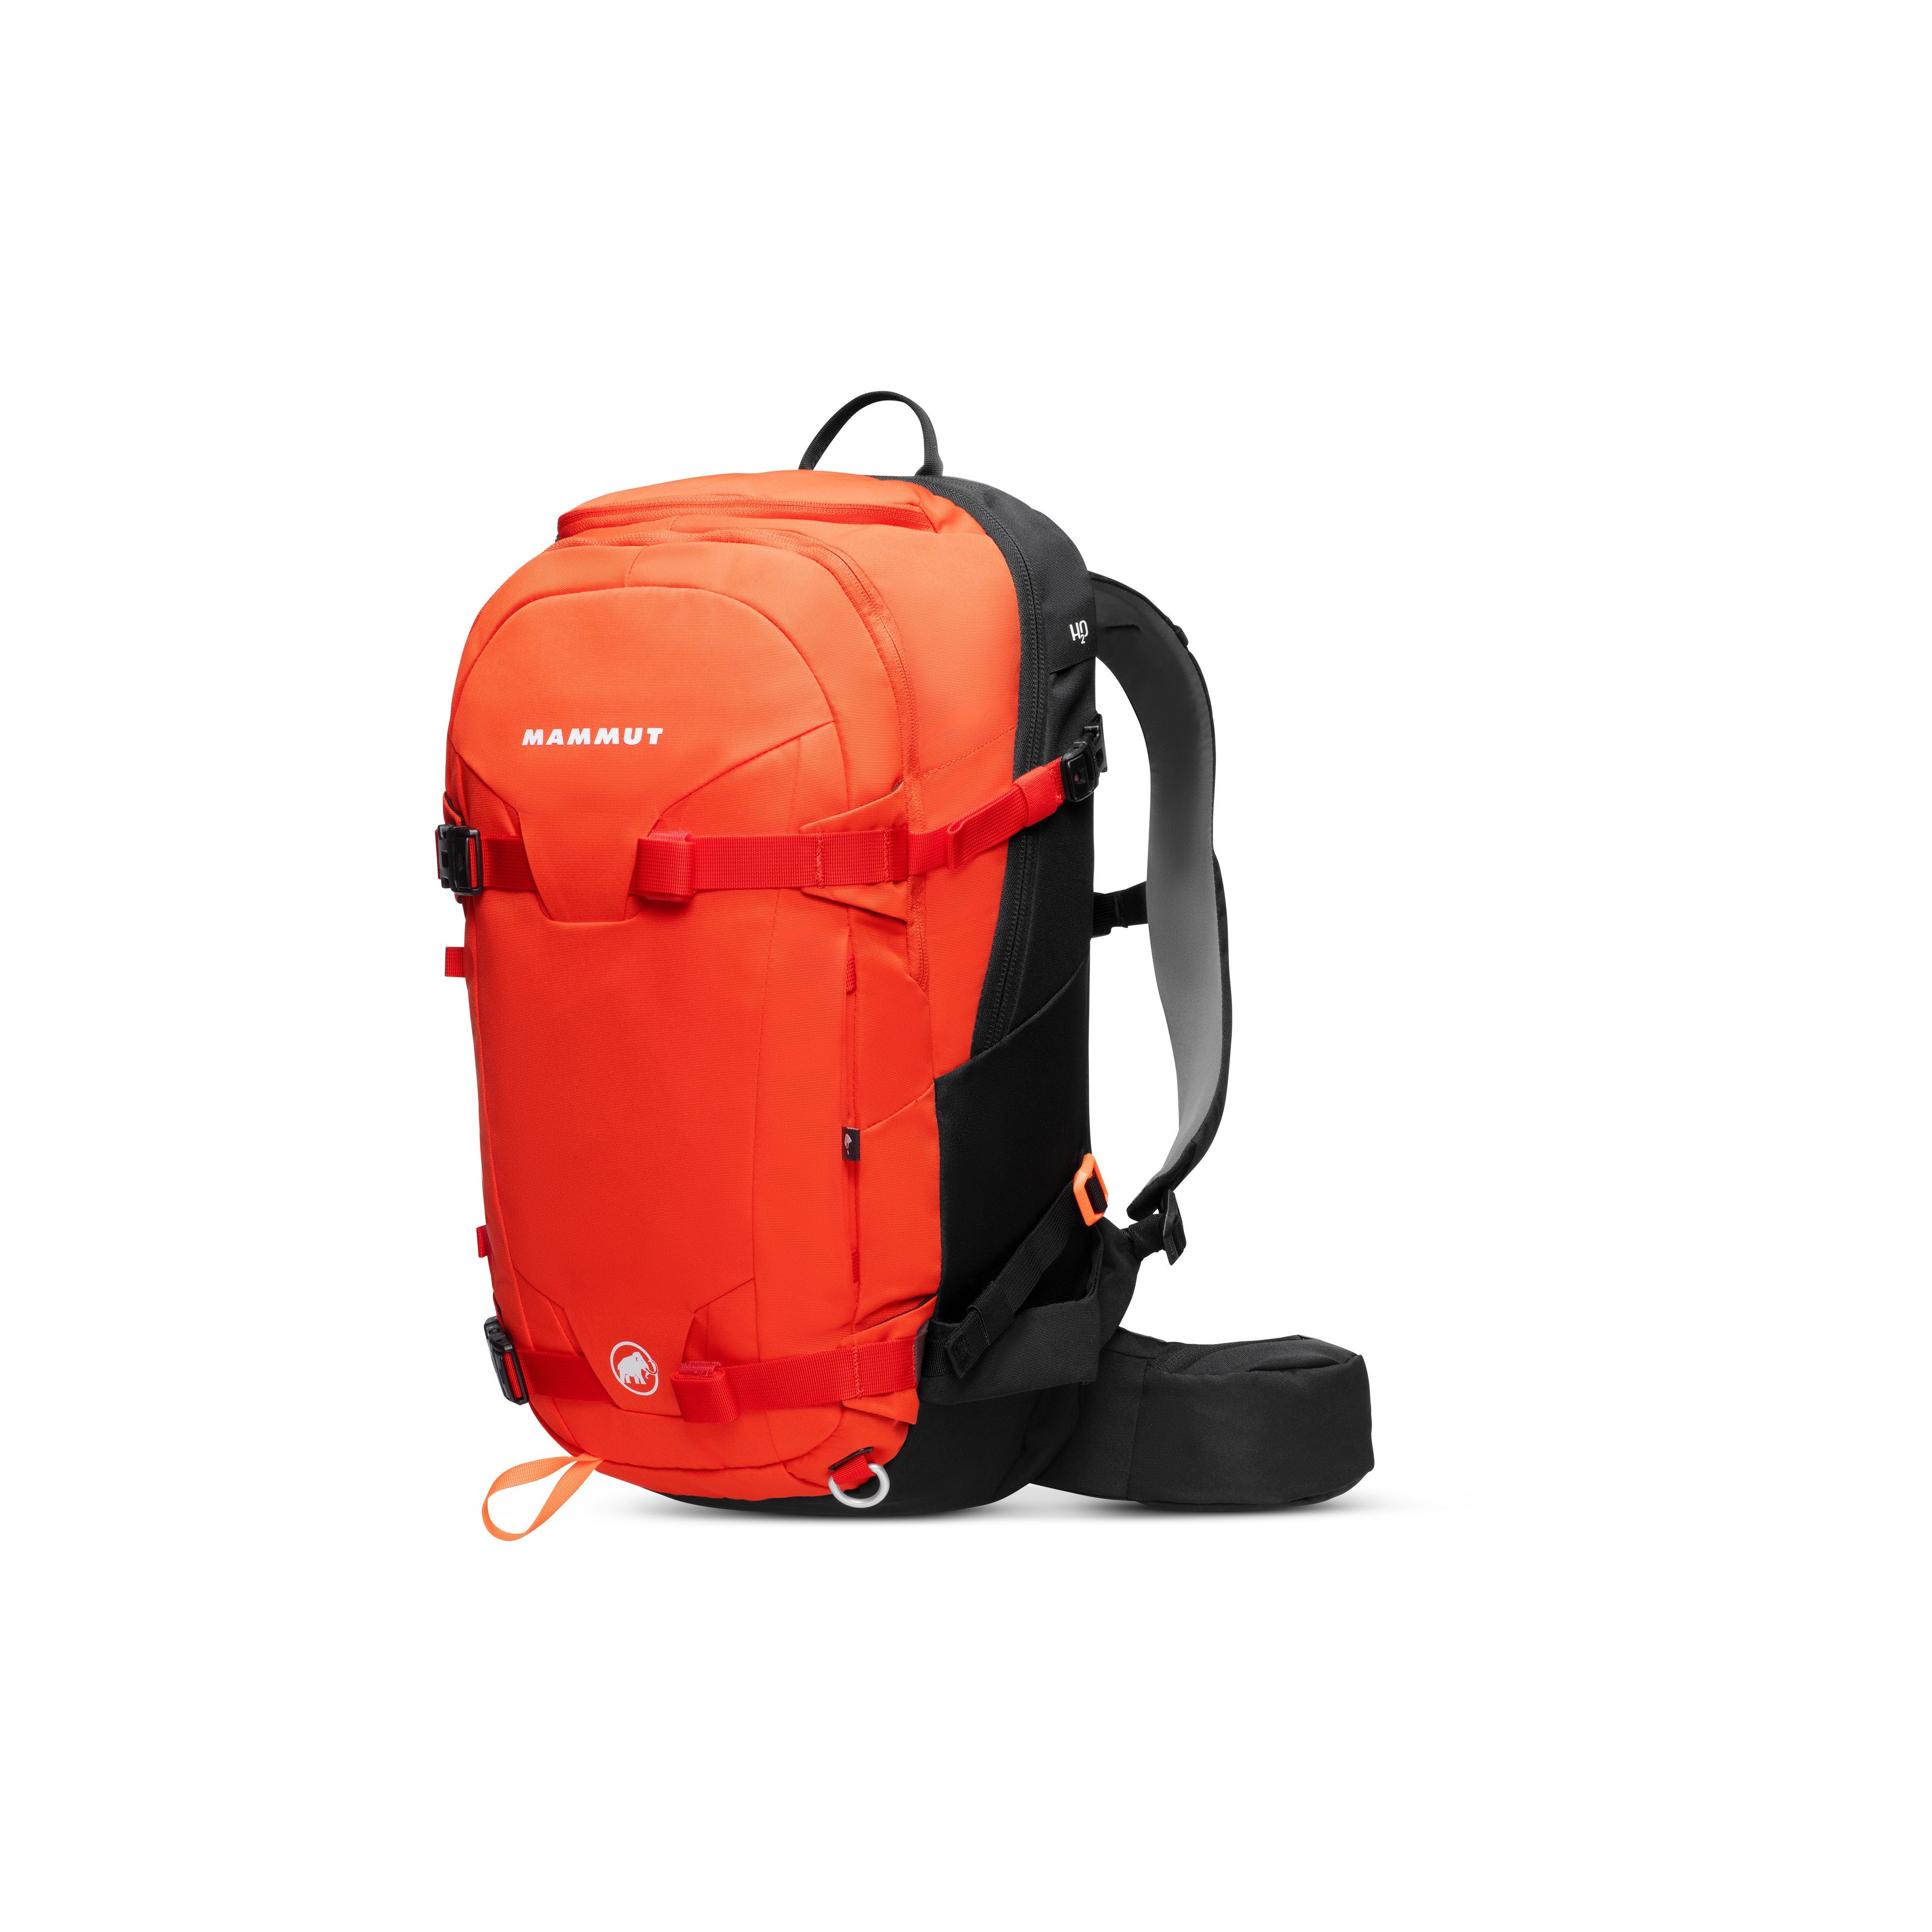 Nirvana 30 - hot red-black, 30 L product image